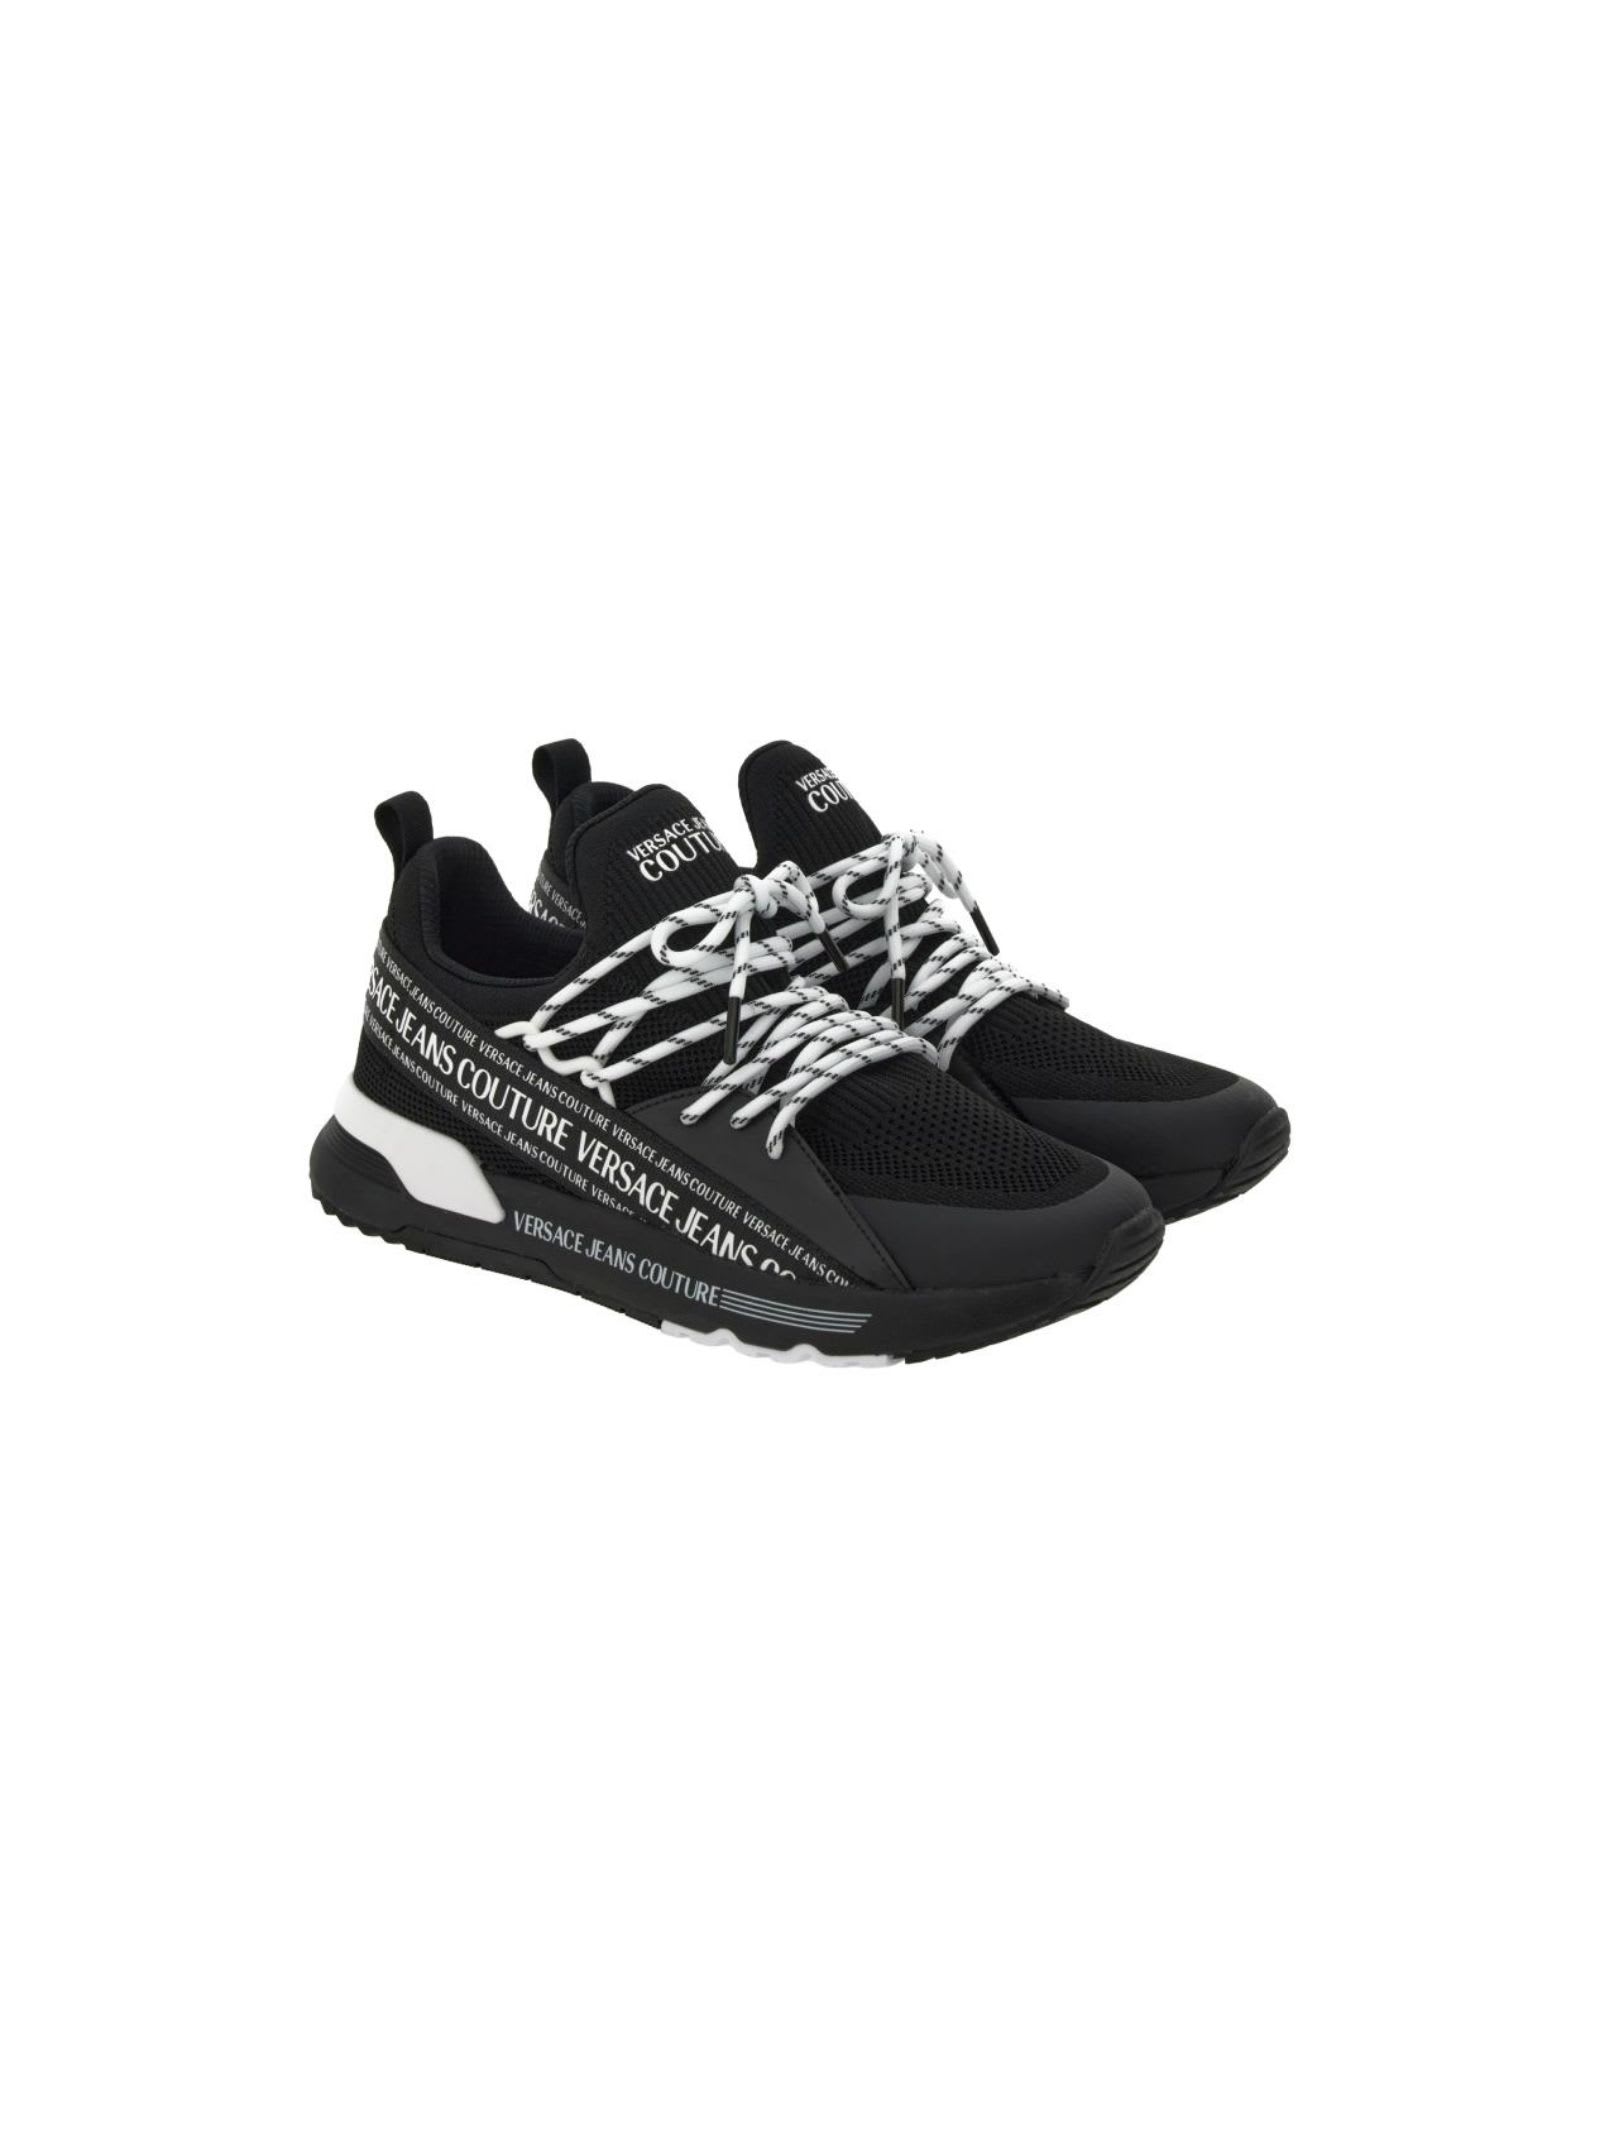 Shop Versace Jeans Couture Mens Sneakers In Black